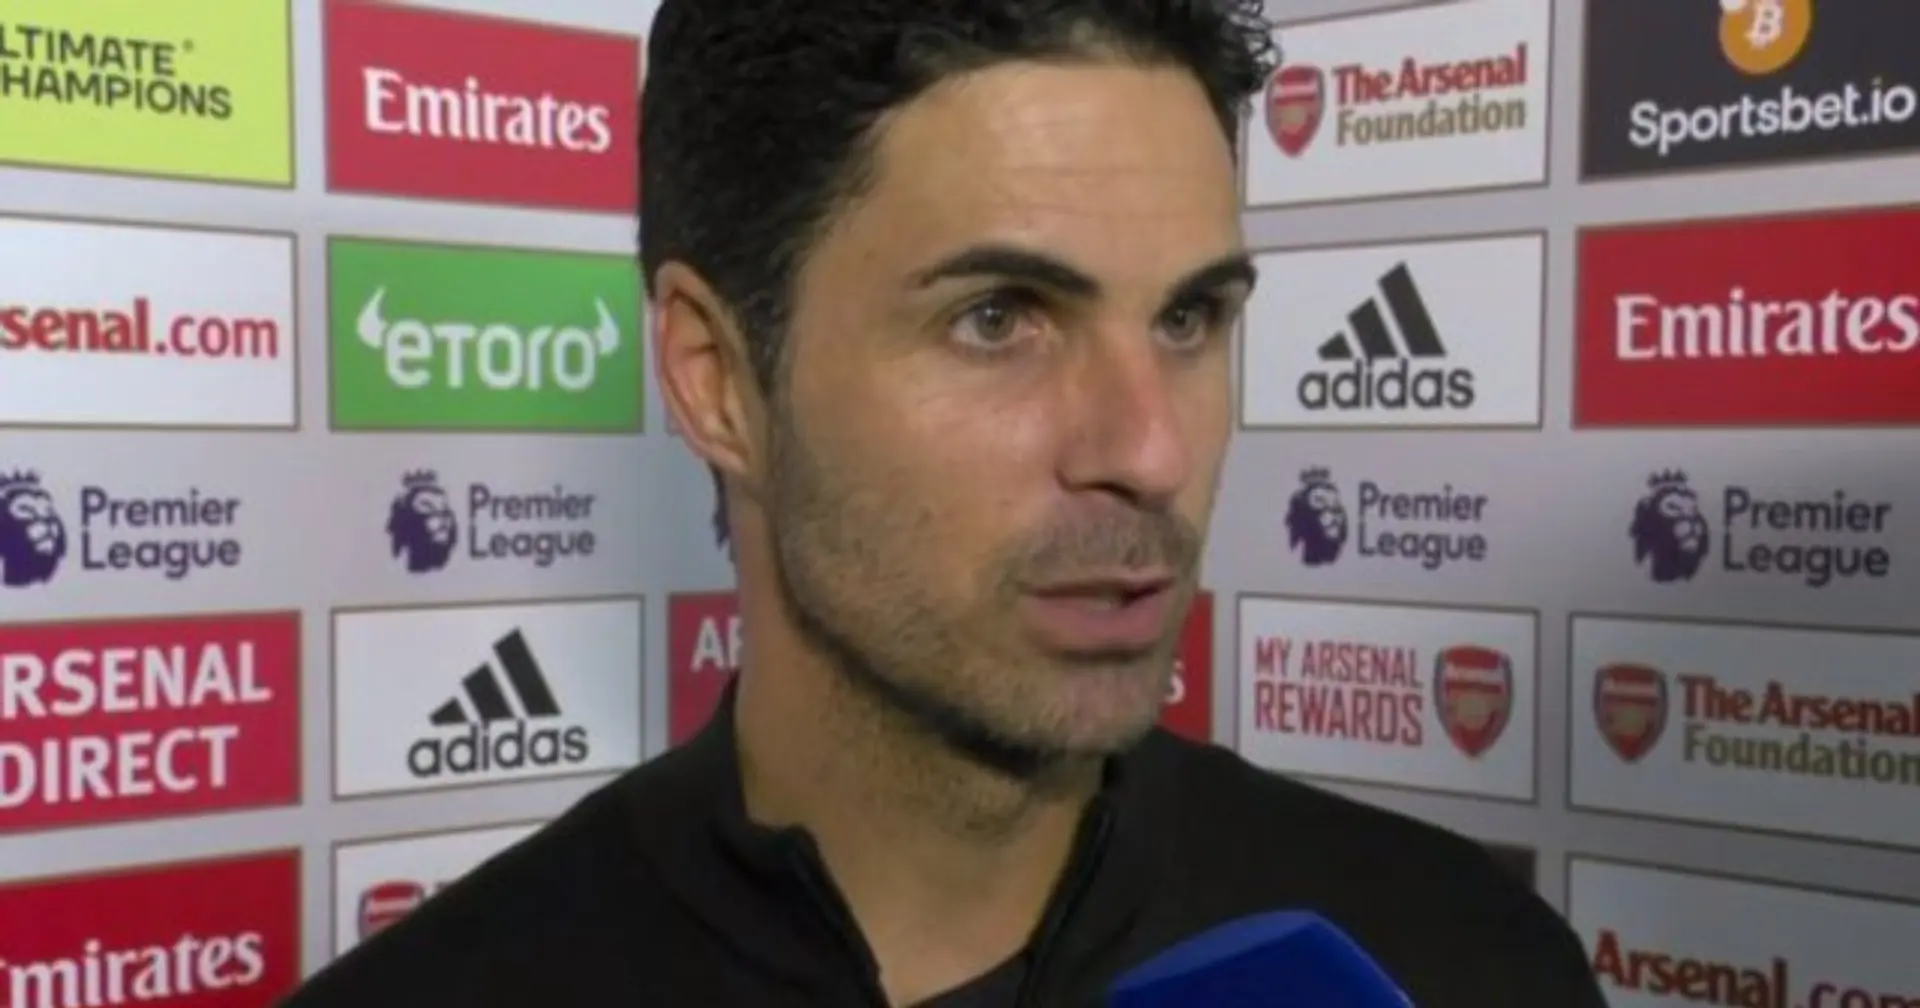 'We had what we had': Arteta on lack of depth after making just one sub in Newcastle game